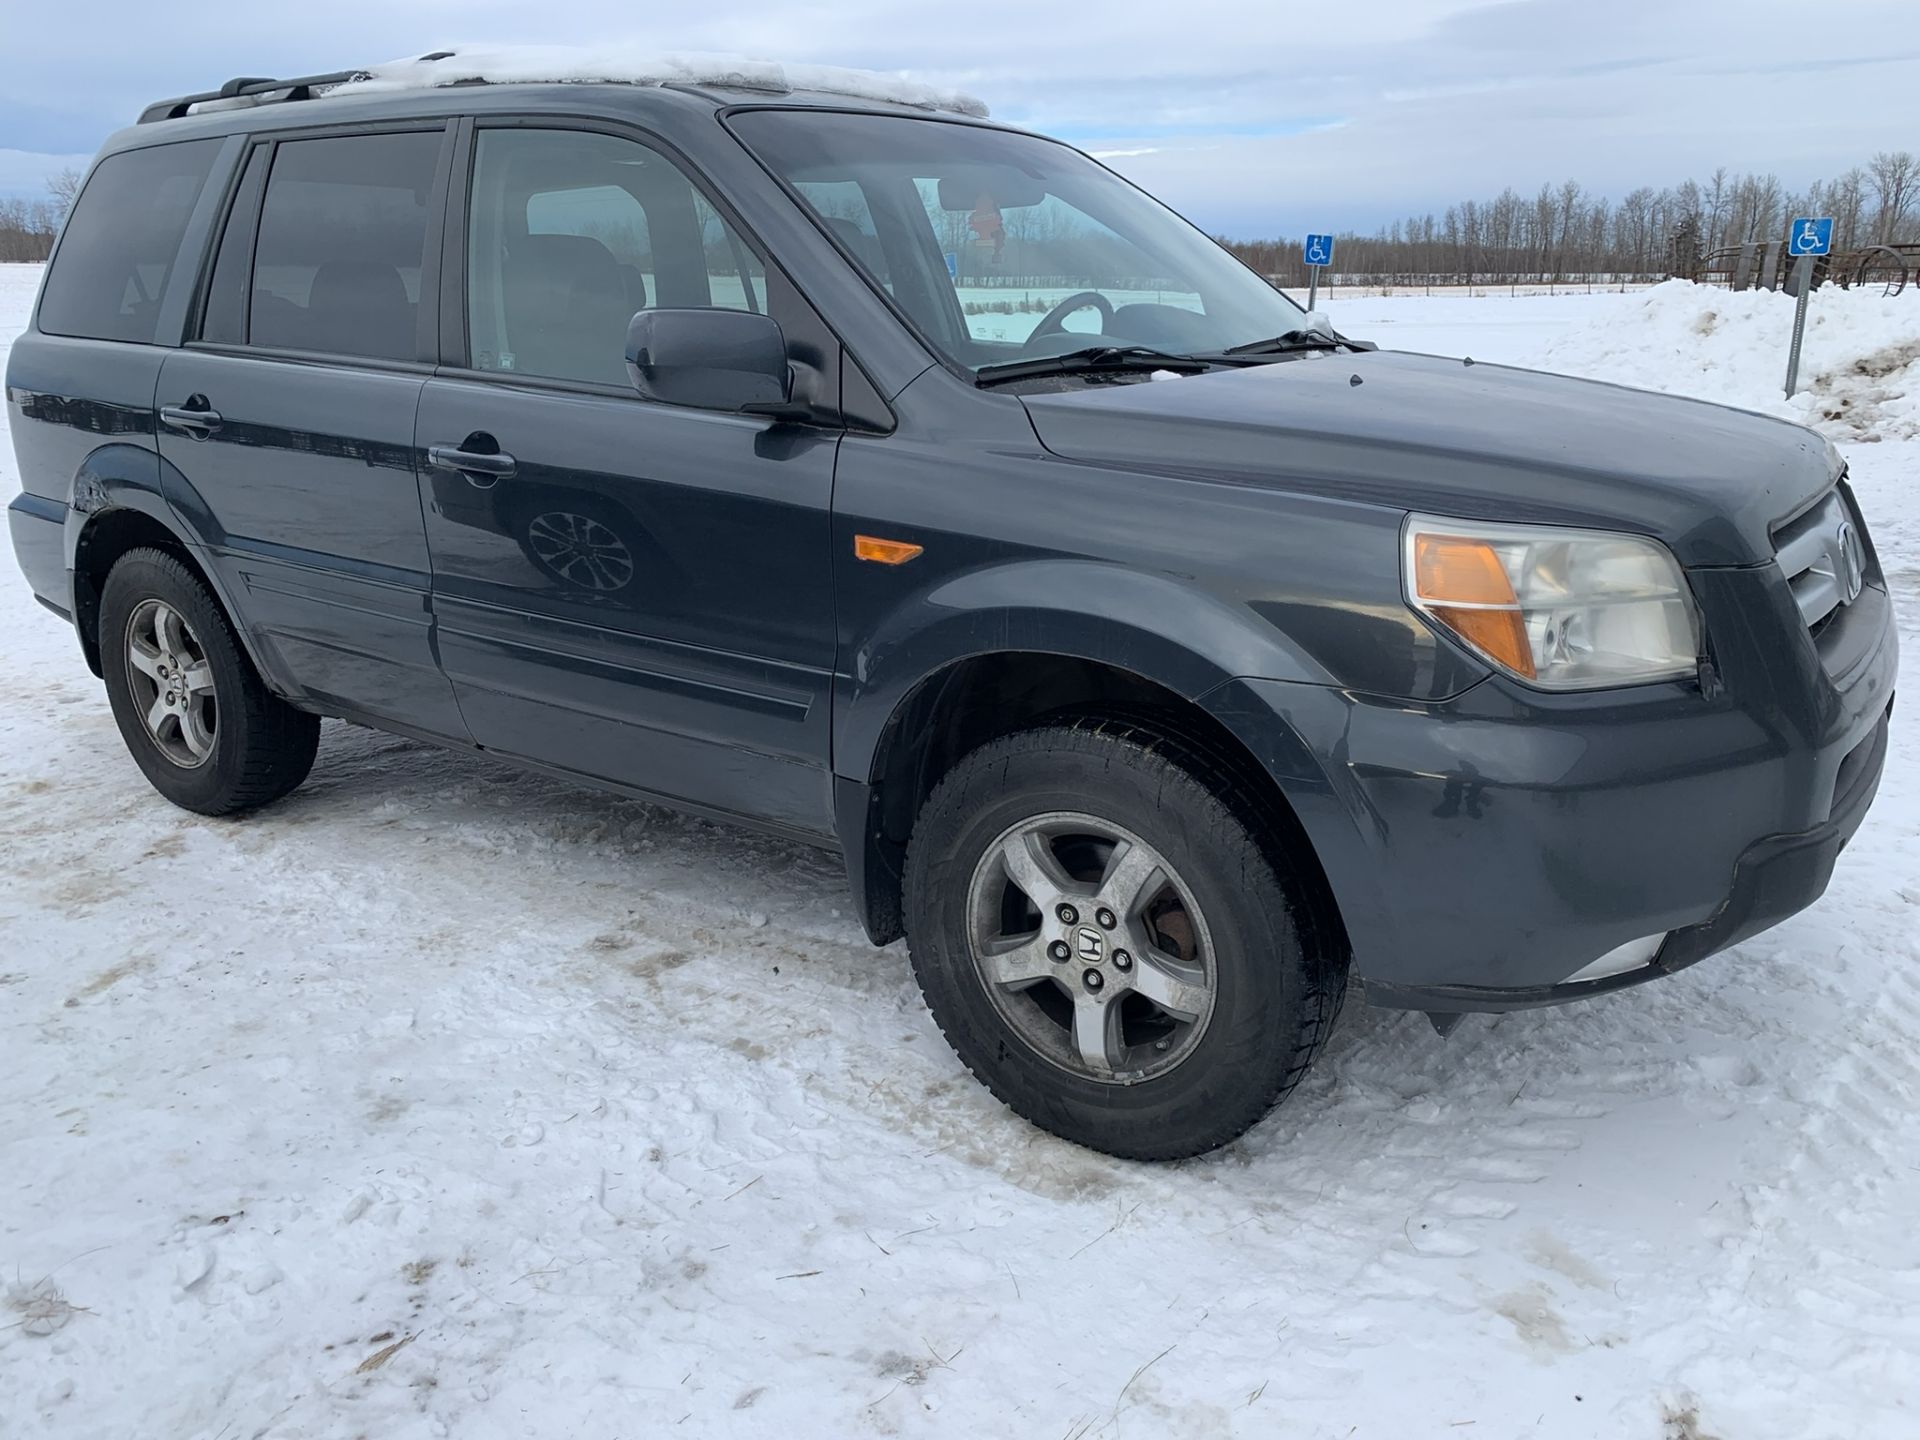 2006 HONDA PILOT SUV, AWD, V6, 4DR, LEATHER, APROX. 375,000 KMS SHOWING, S/N 2HKYF18546H003826 - Image 2 of 10